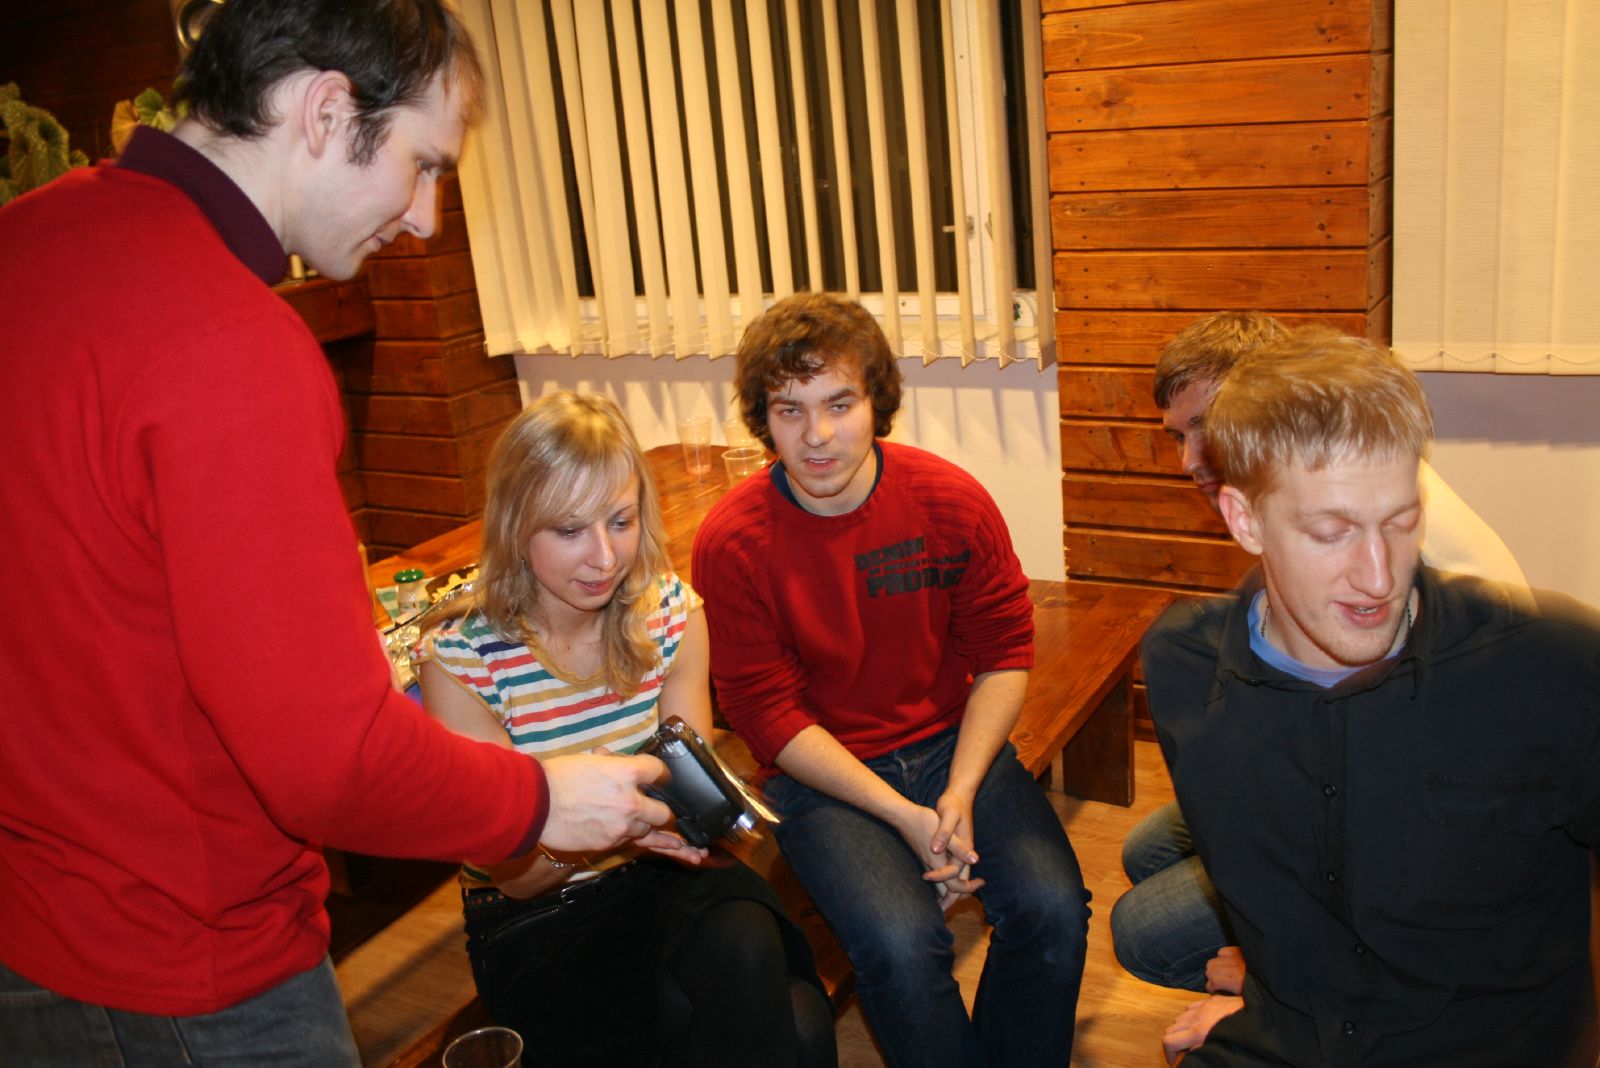 a group of young adults sit on the floor with remote controls